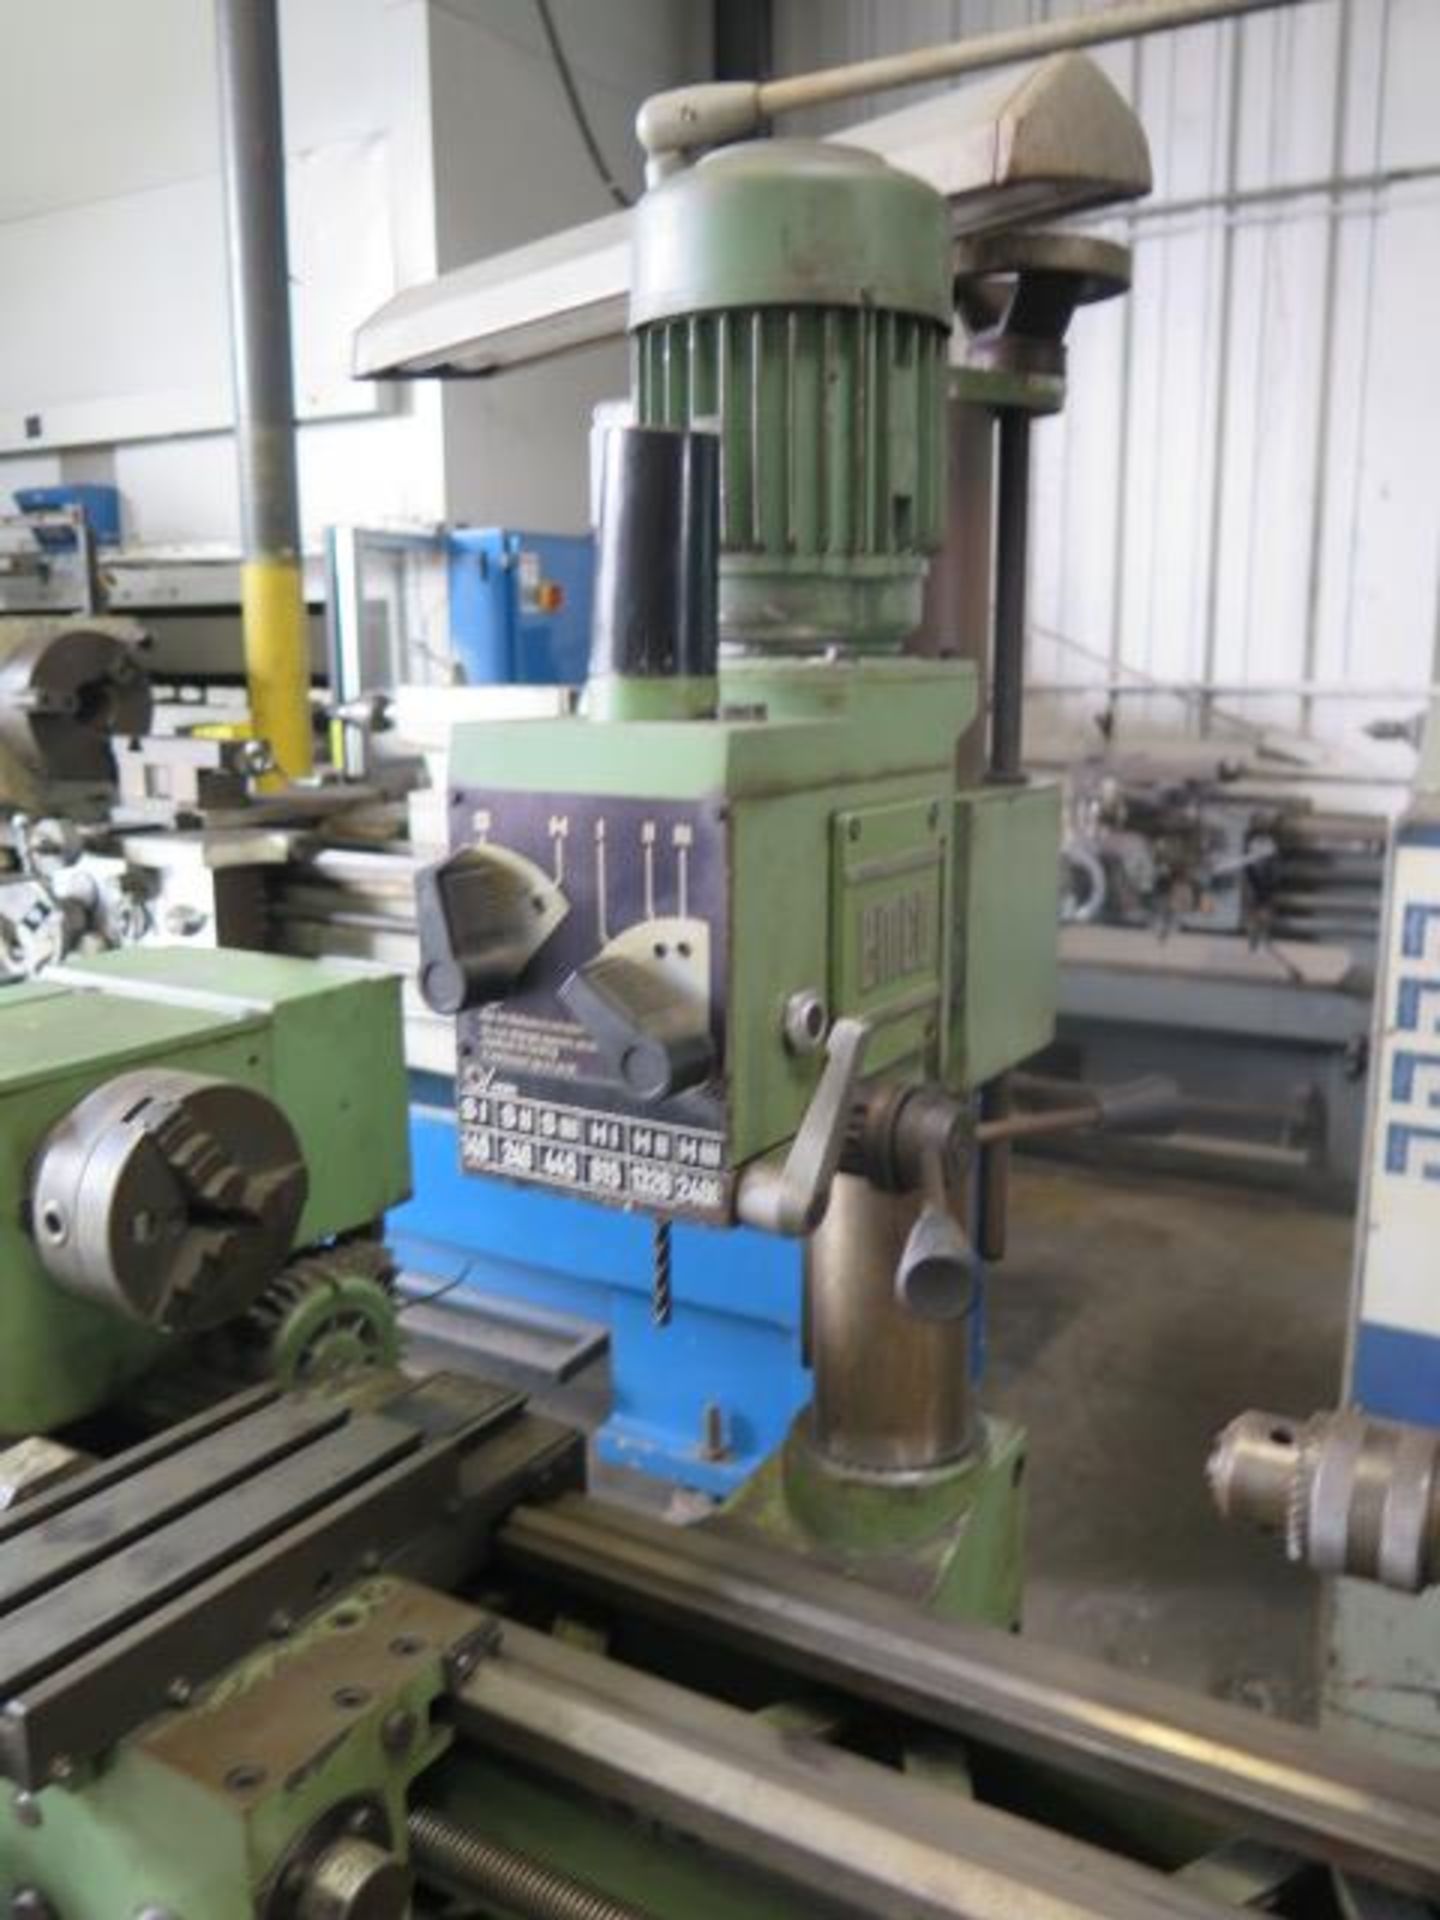 Emco “Maximat Mentor 10” Mill / Drill Machine w/ 60-2500 RPM (SOLD AS-IS - NO WARRANTY) - Image 12 of 16